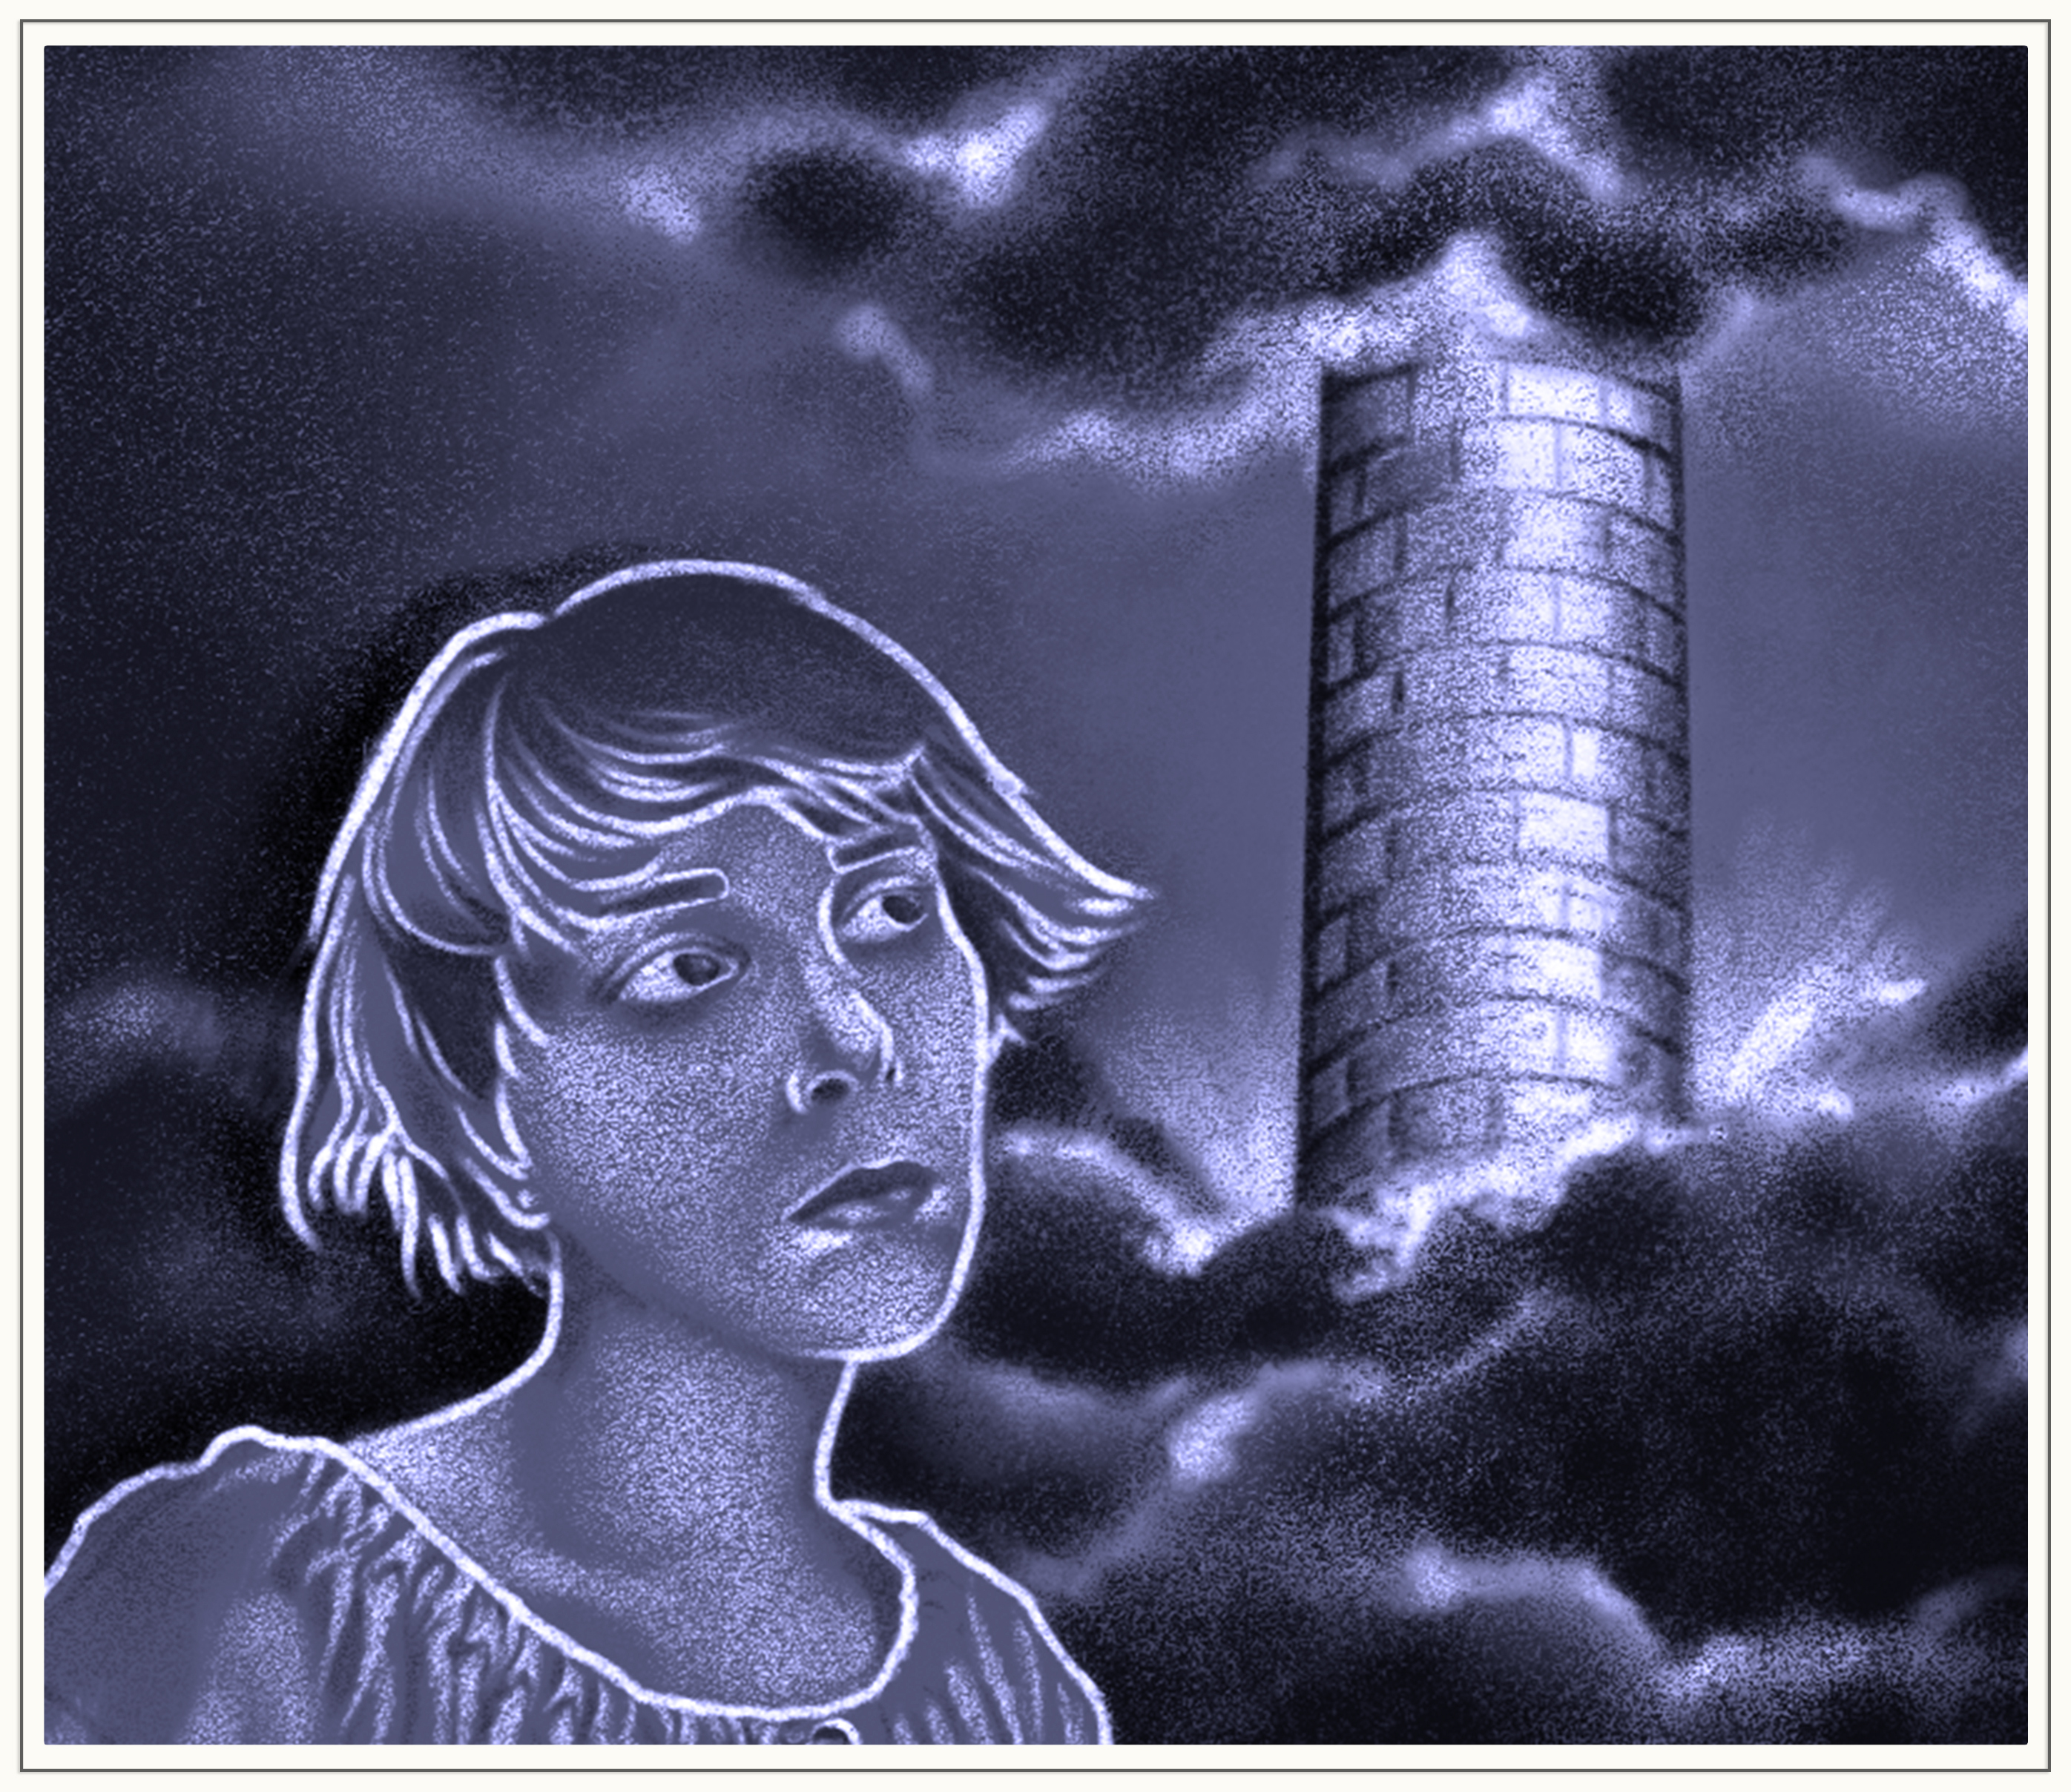 A digital drawing. A girl in the foreground looks distantly or contemplatively to her upper left with a cylindrical brick tower looming behind her. The girl has short hair. The sky is dark, almost black. Dark, stormy-looking clouds cover the top and bottom of the brick tower.